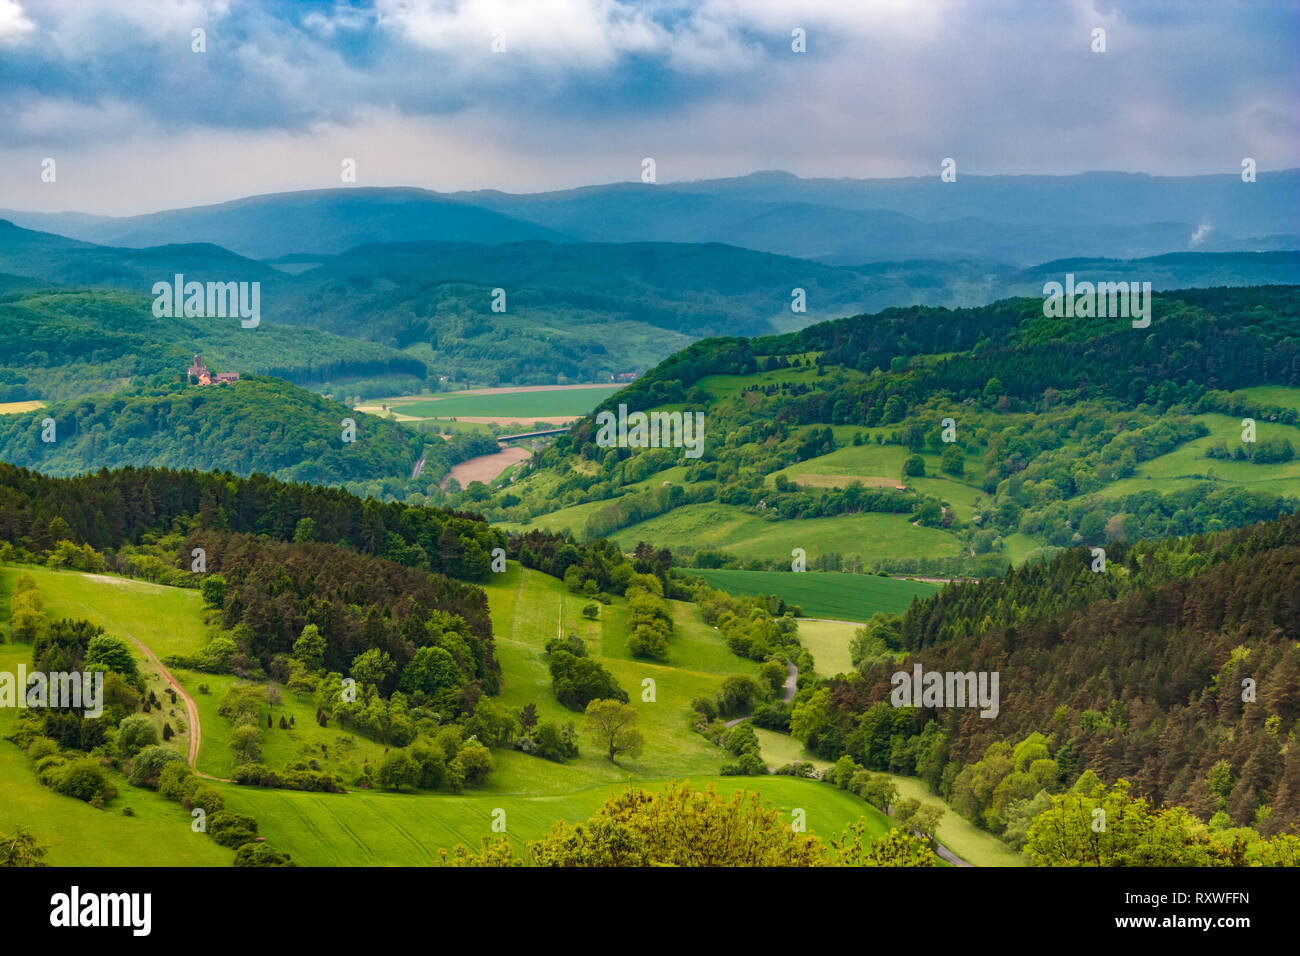 Lovely landscape view of the Werra Valley, the Hessian low mountains and the Ludwigs Castle on the far left. Taken from the famous Hanstein Castle, on... Stock Photo